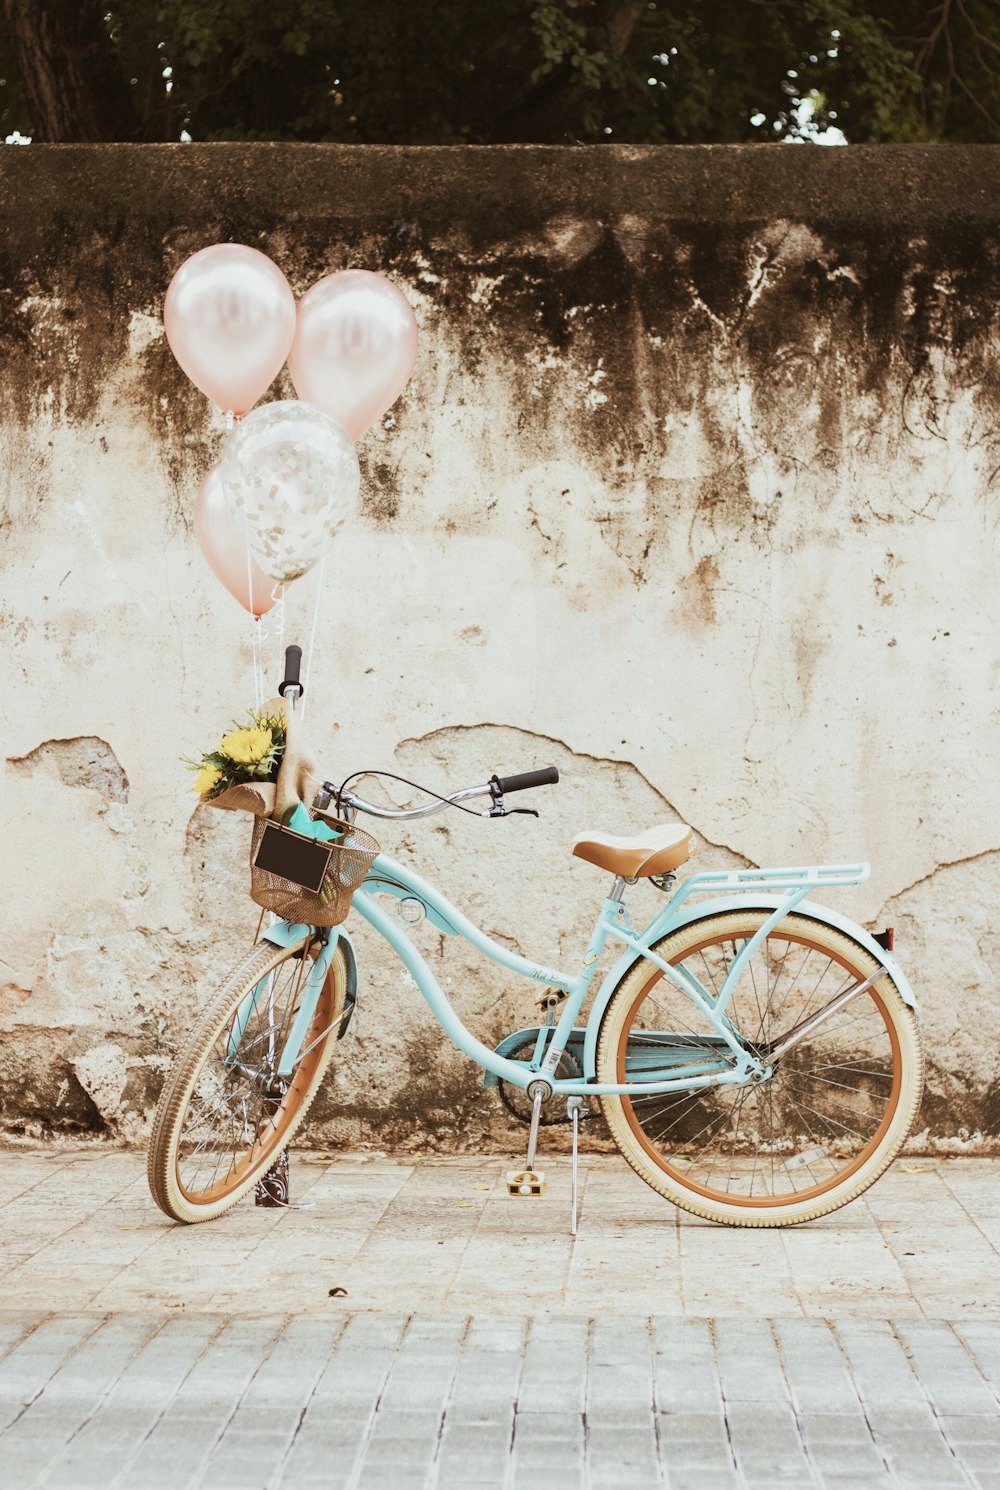 a blue bicycle with balloons attached to it